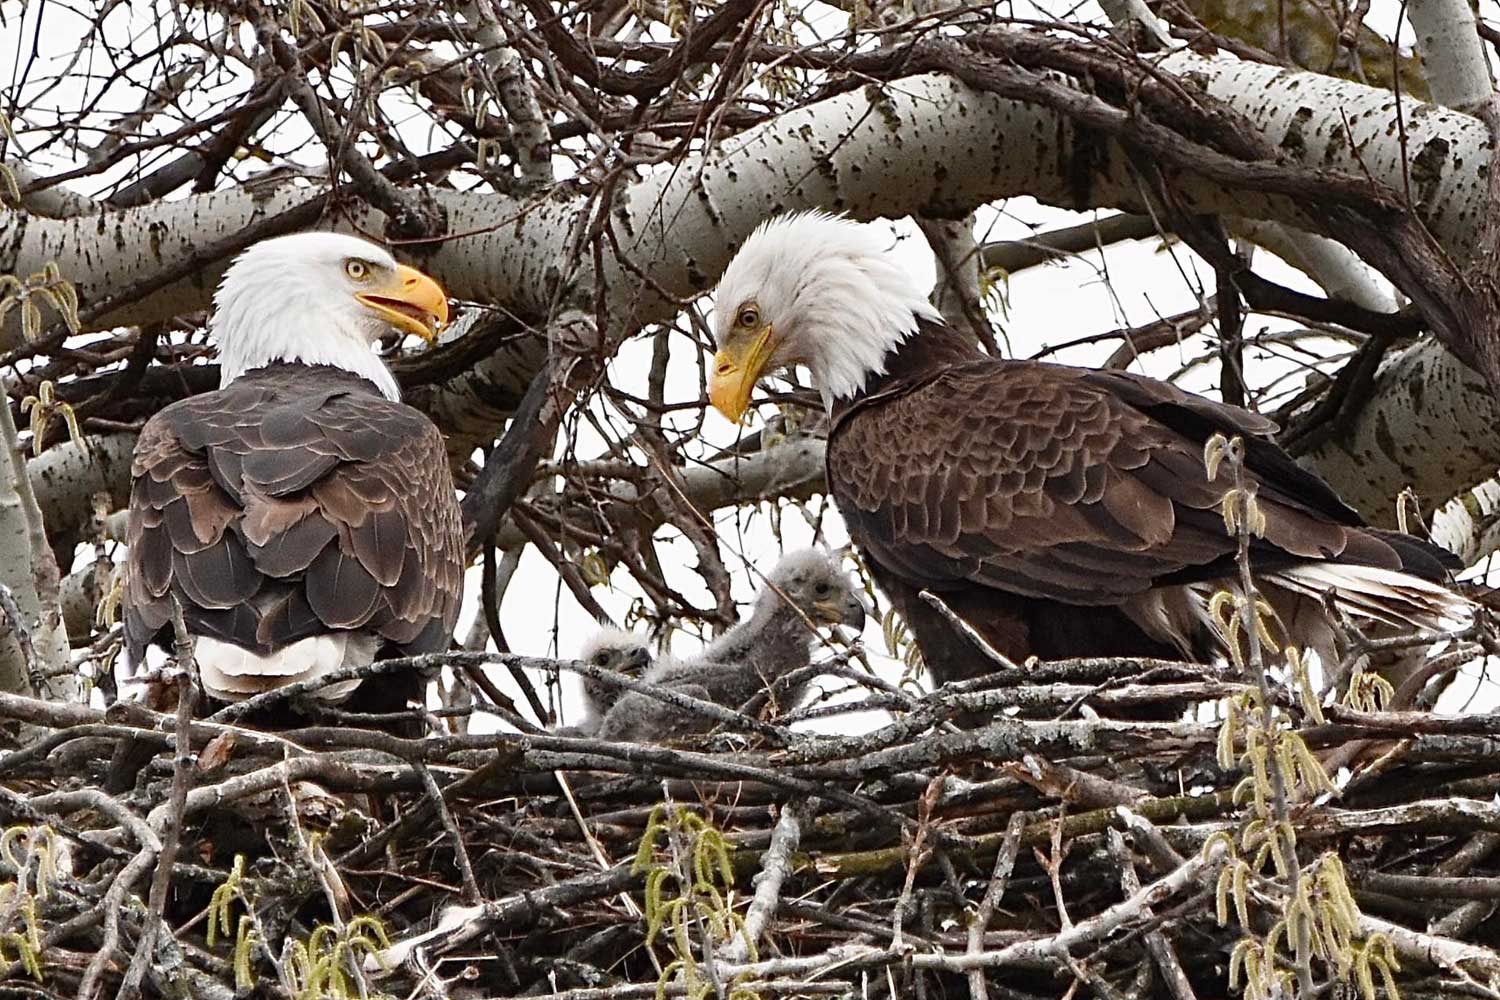 Two bald eagles and their eaglets in a nest.